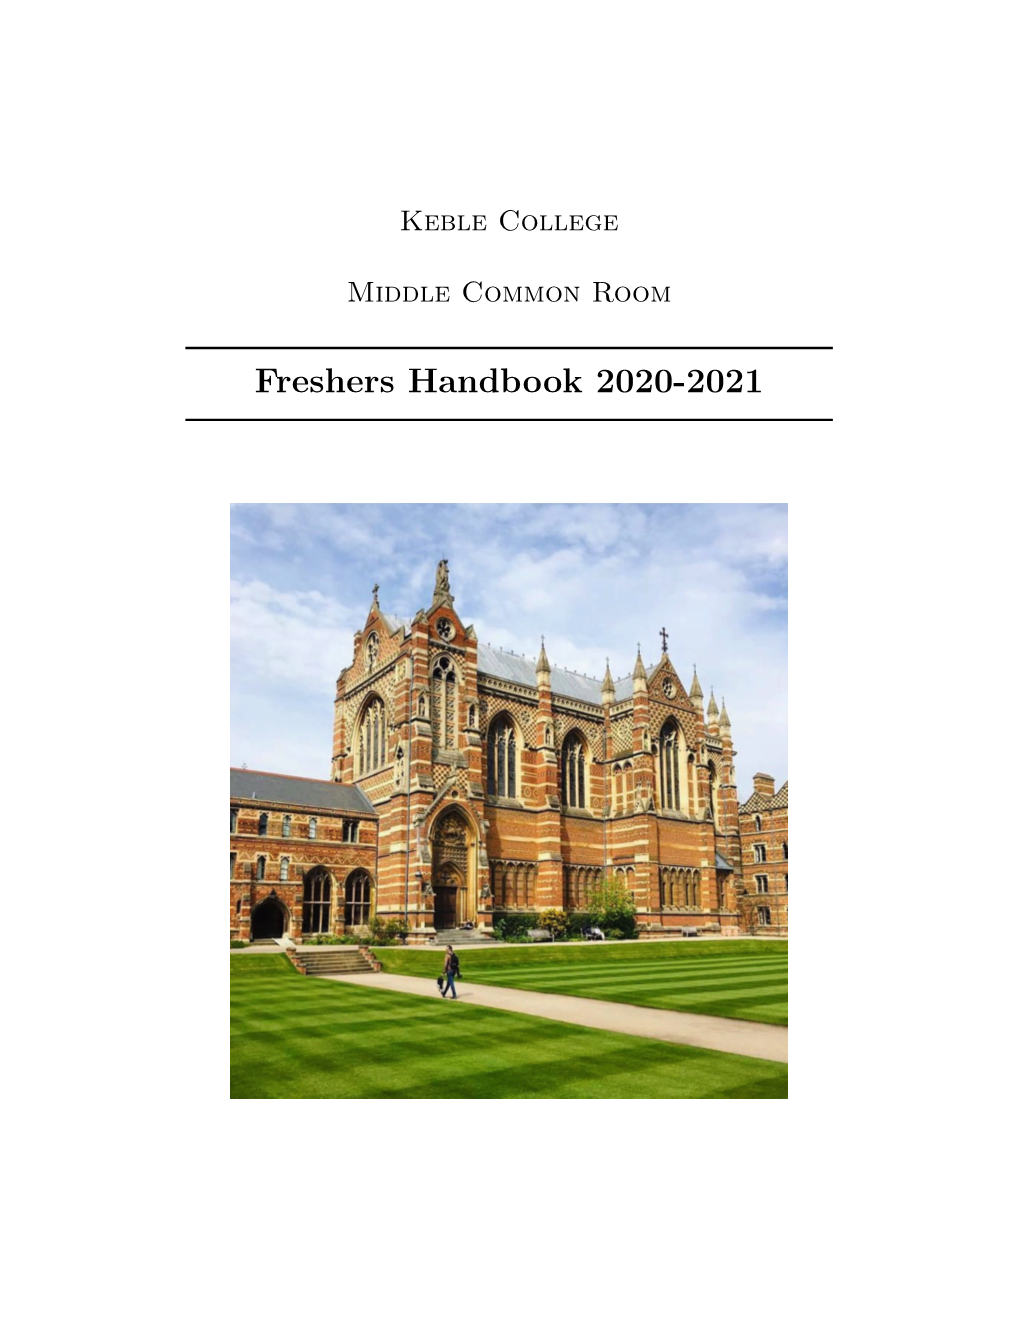 Freshers Handbook 2020-2021 Table of Contents